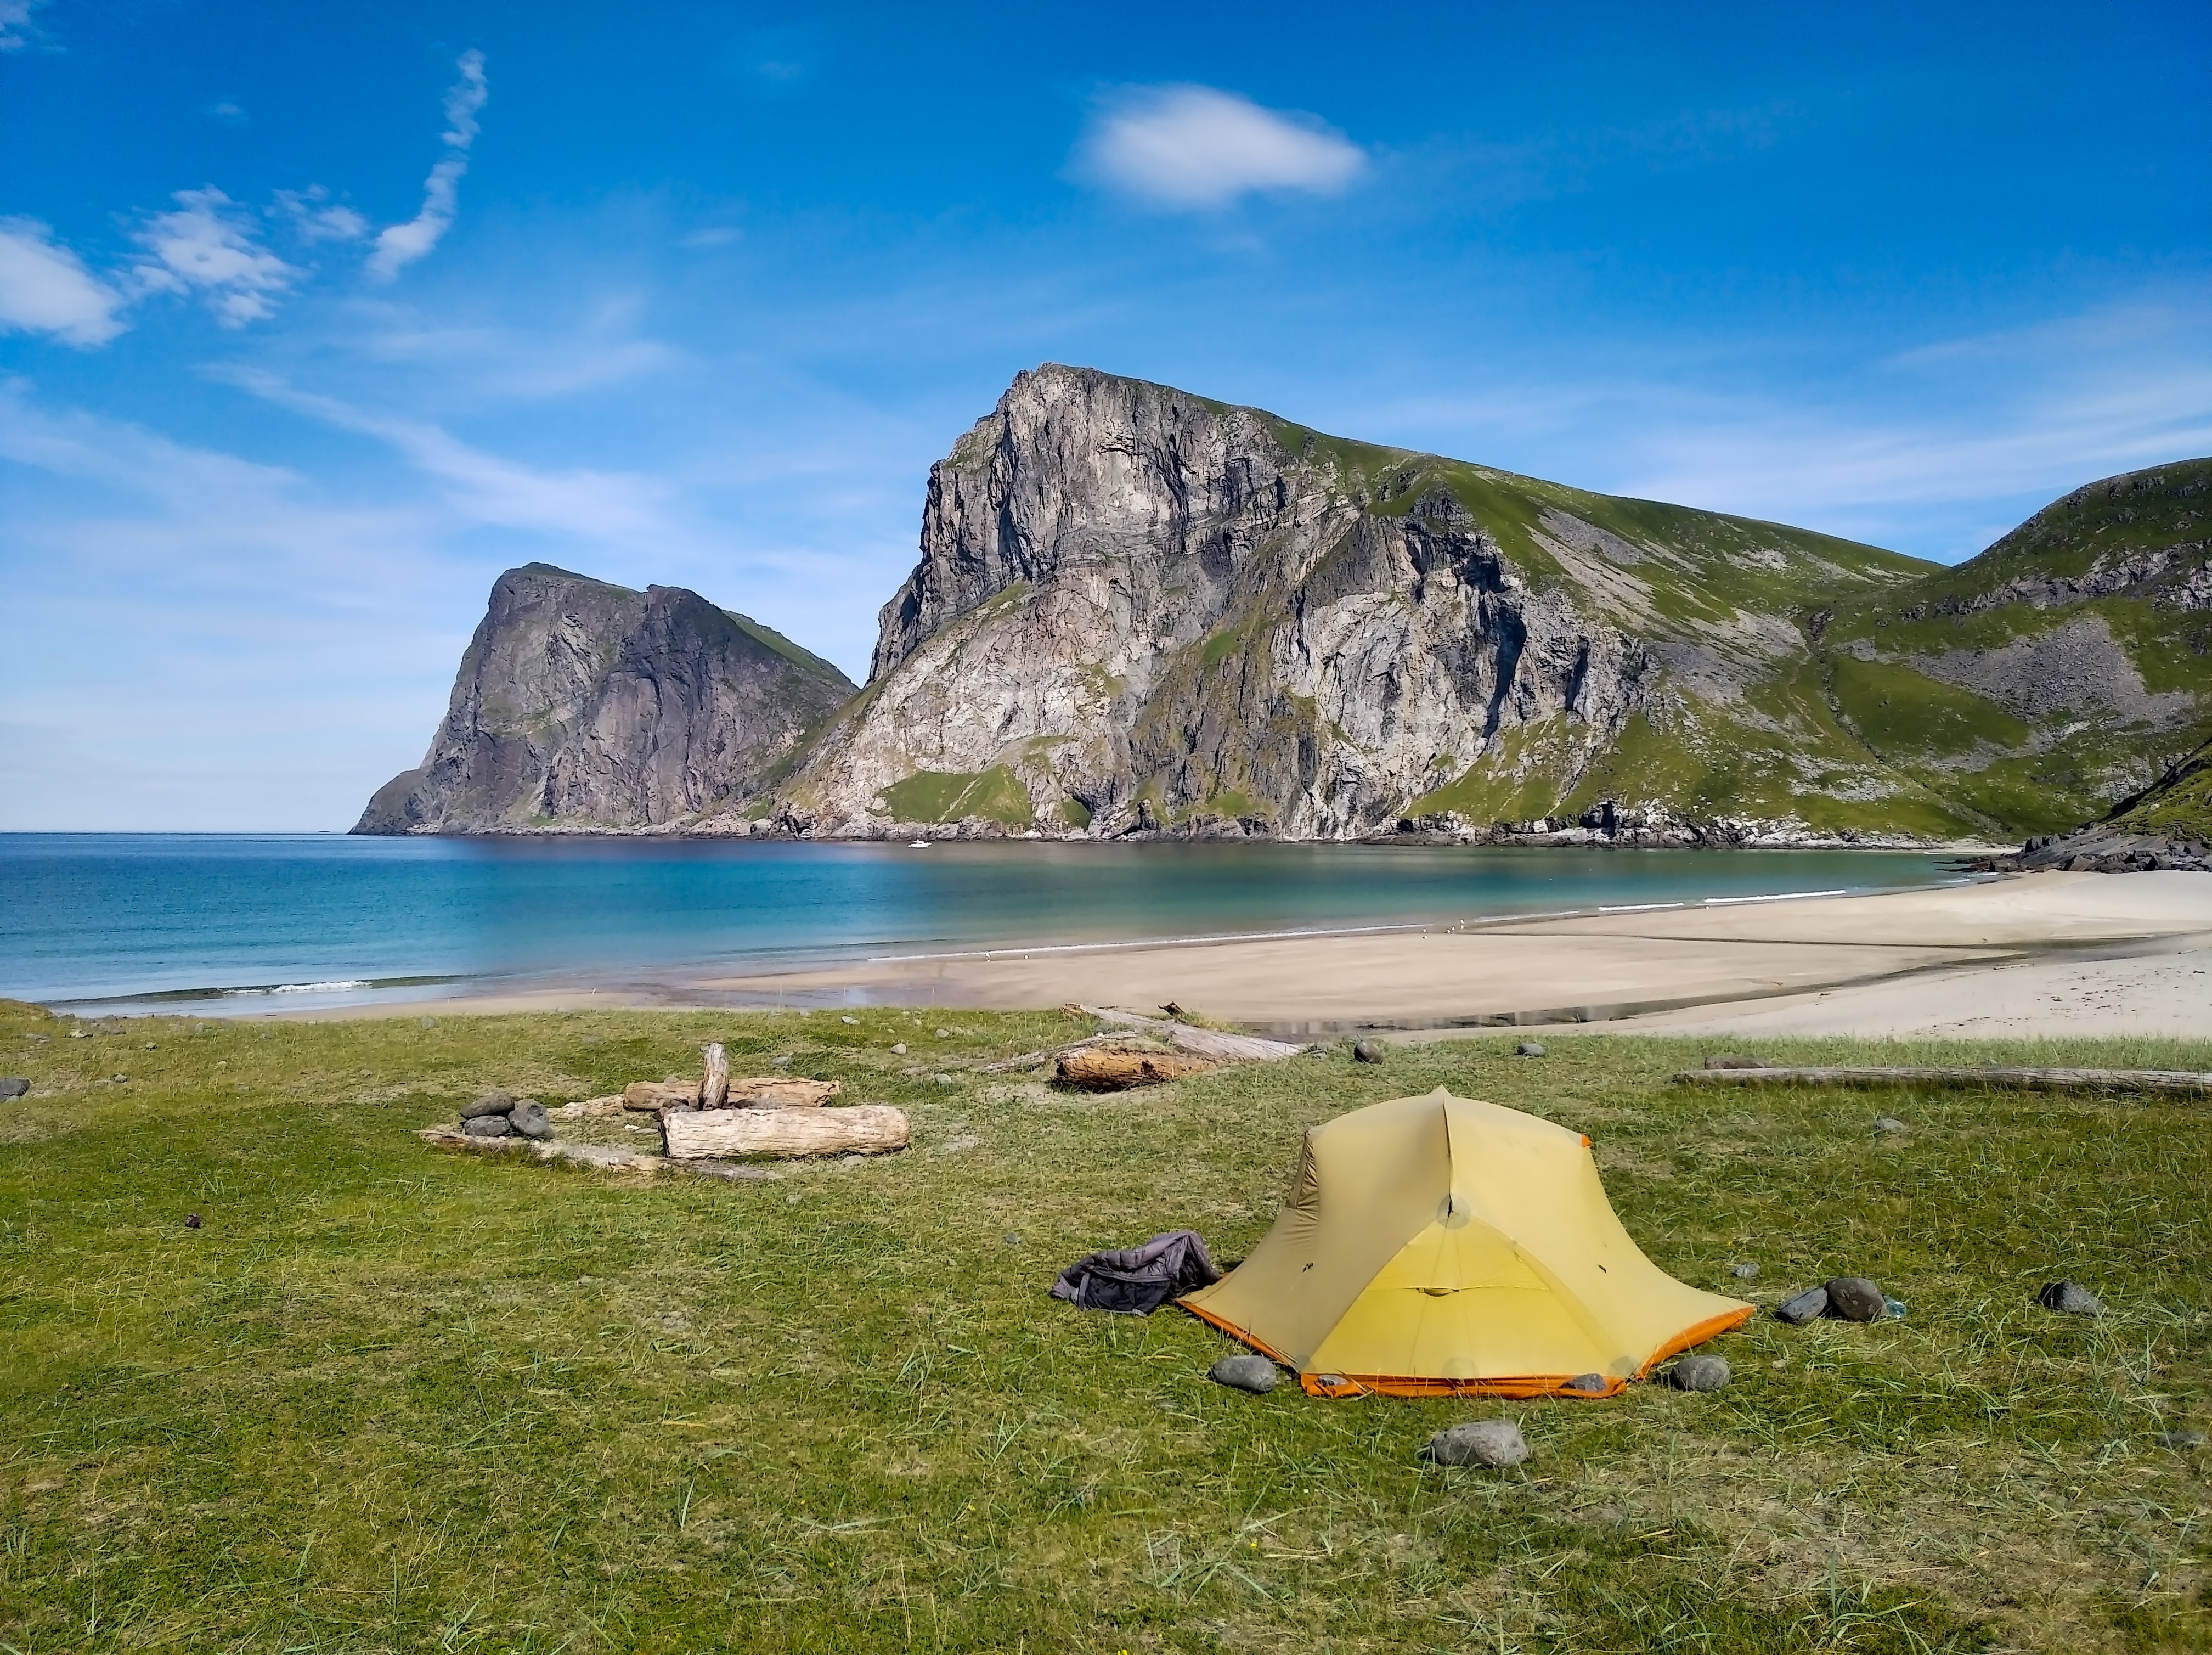 Some Useful Tips For Beach Camping